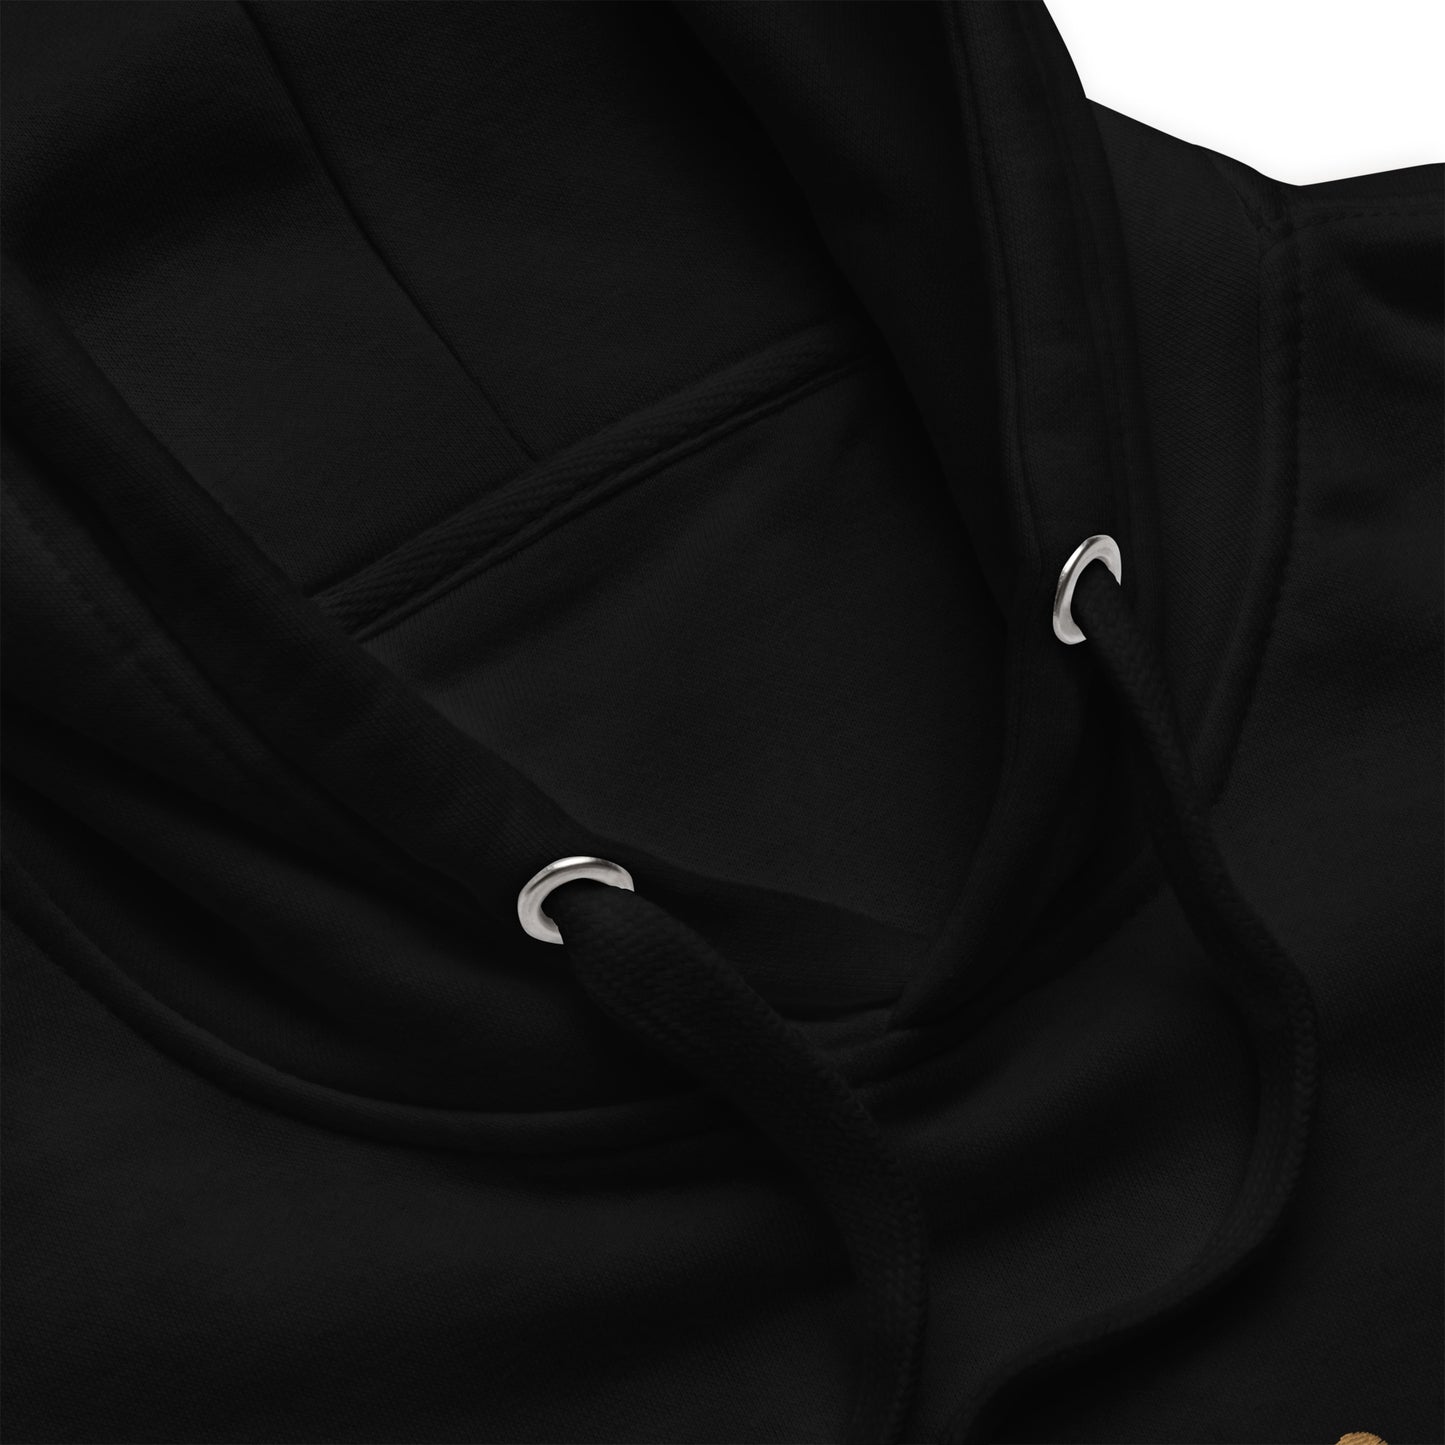 Close up of a black hoodie's string and grommet details.